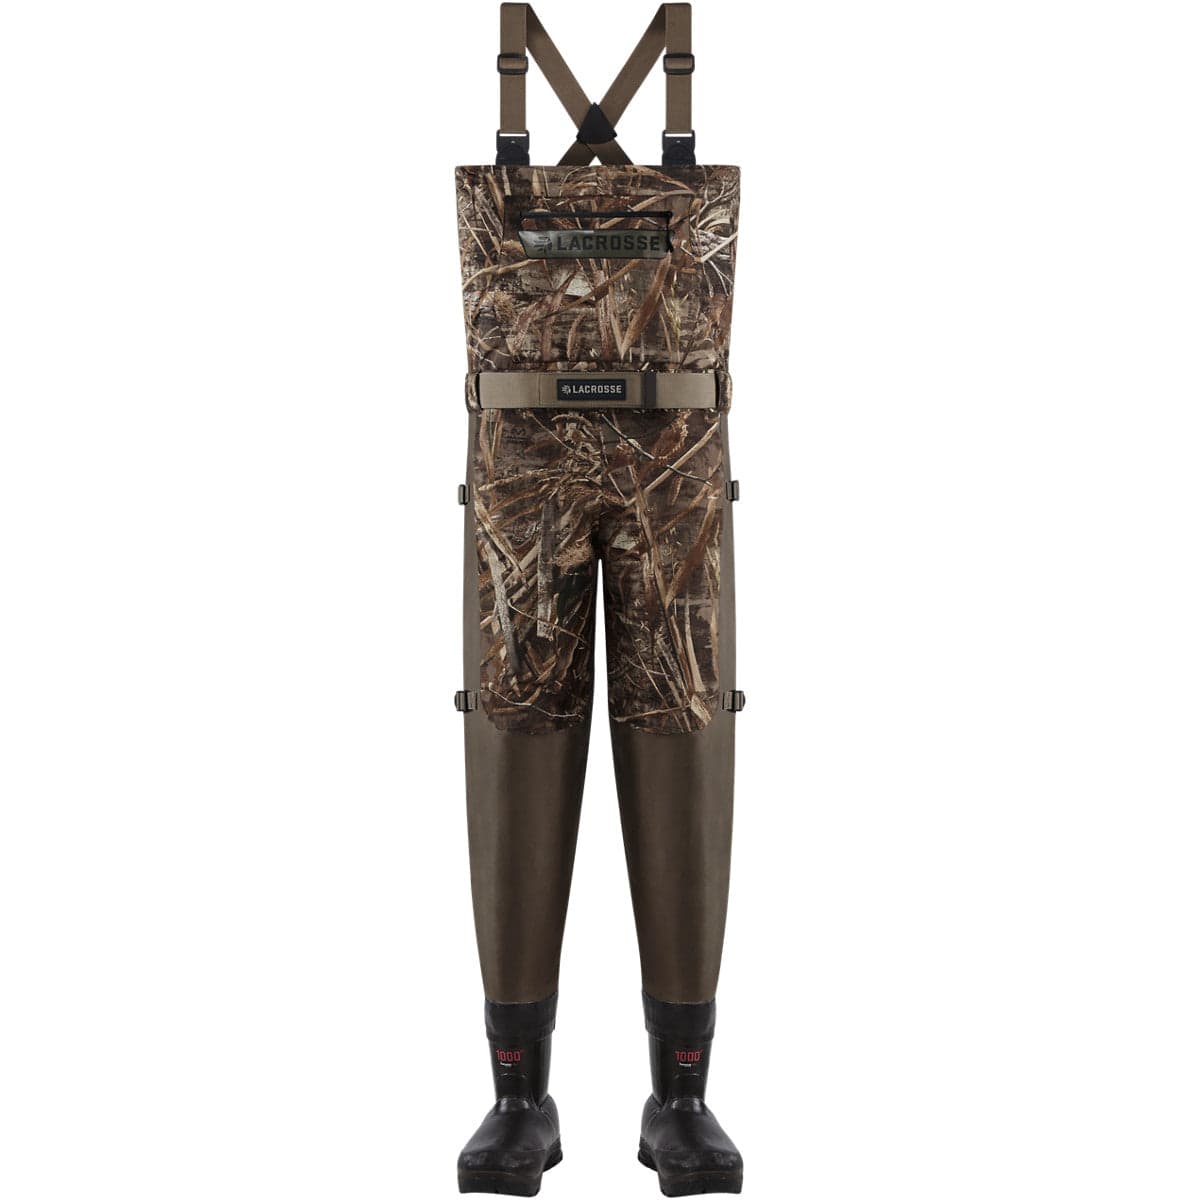 LaCrosse Insulated Alpha Swampfox Wader by Texas Fowlers